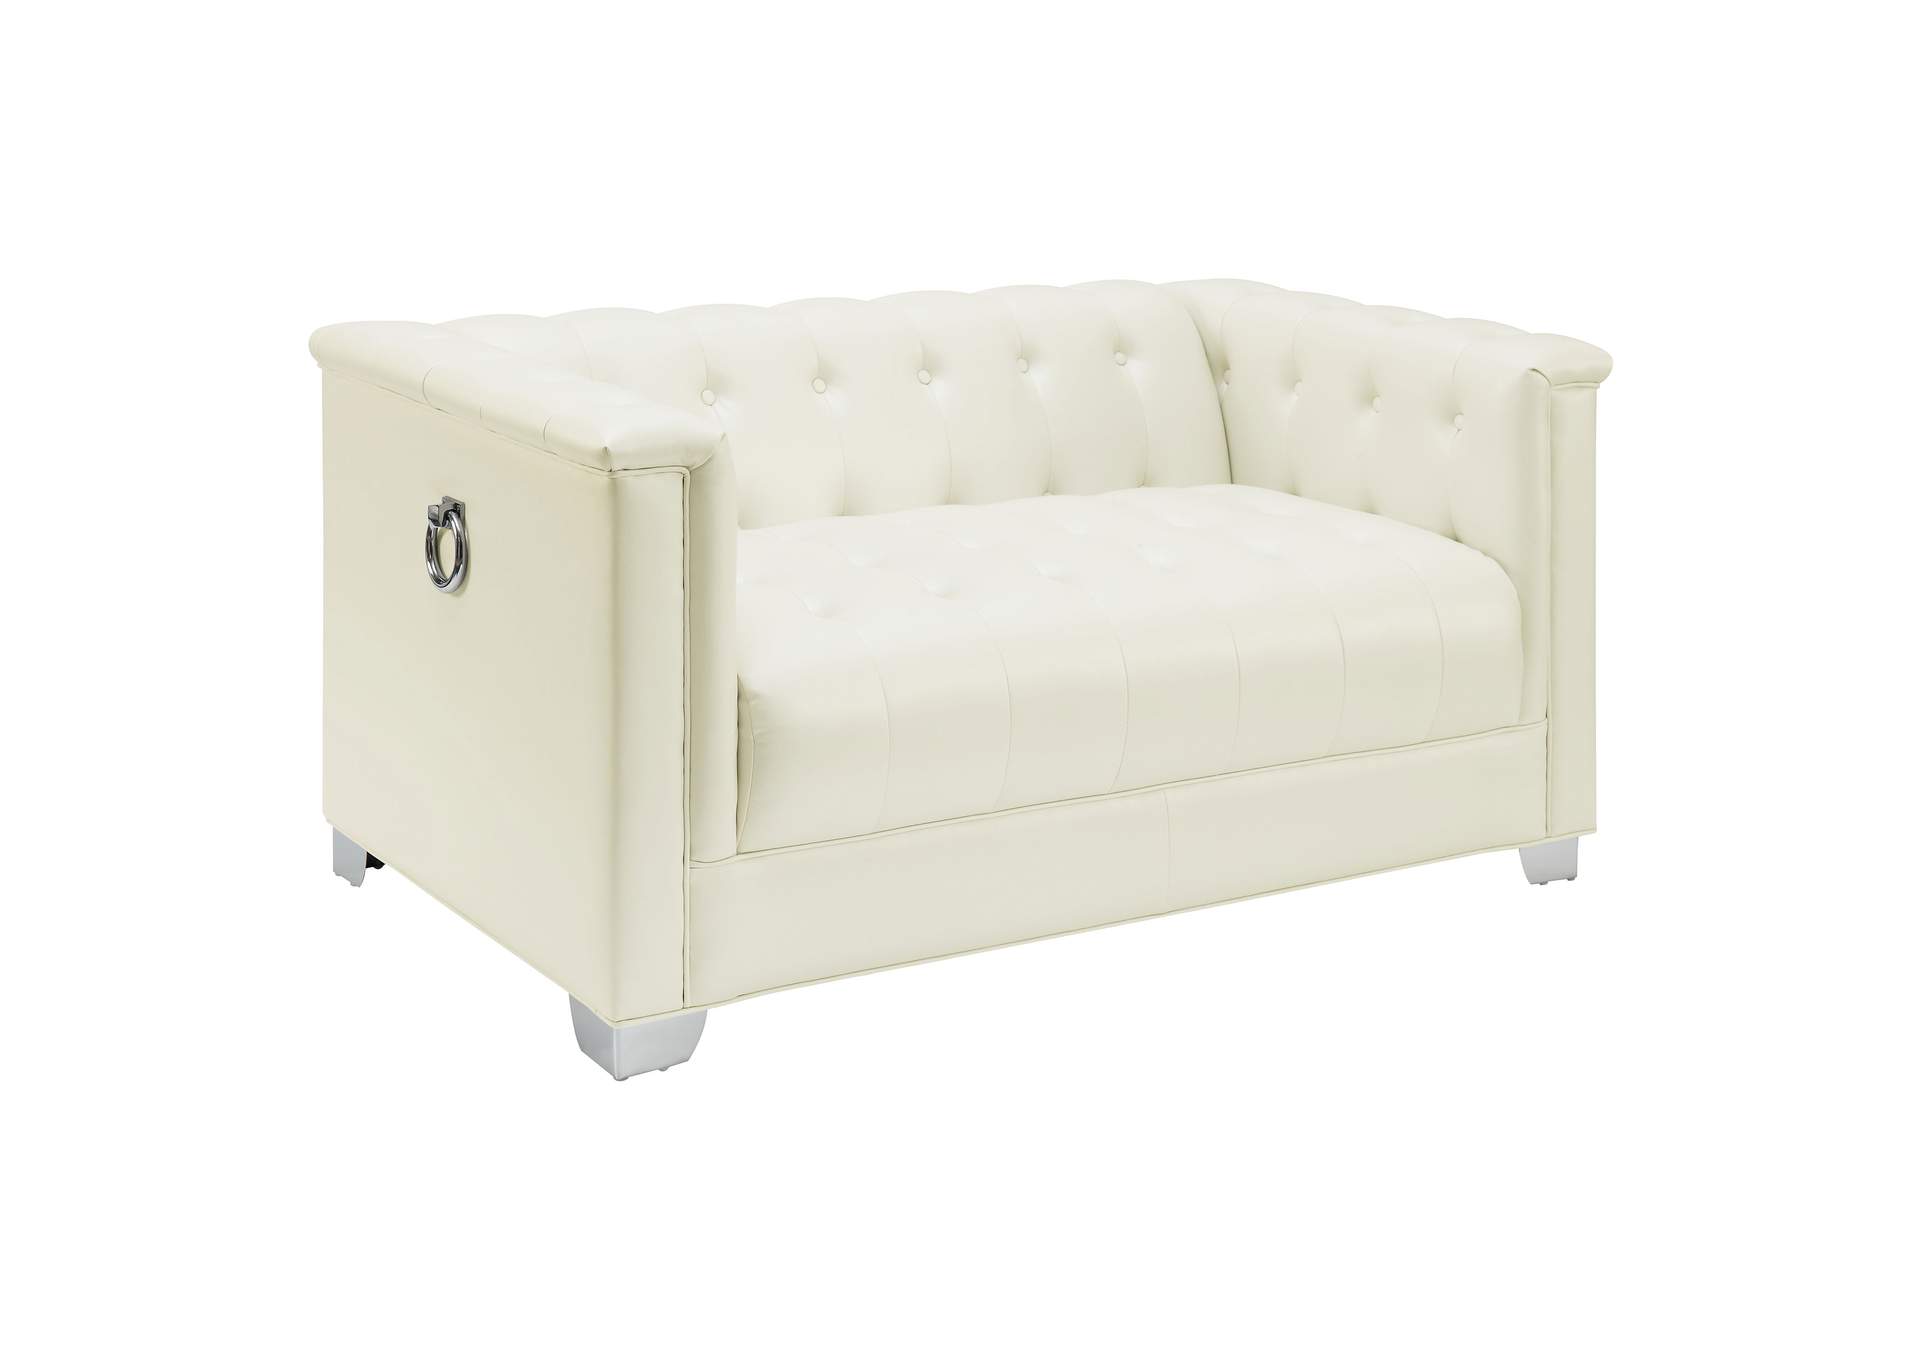 Chaviano Upholstered Tufted Living Room Set Pearl White,Coaster Furniture